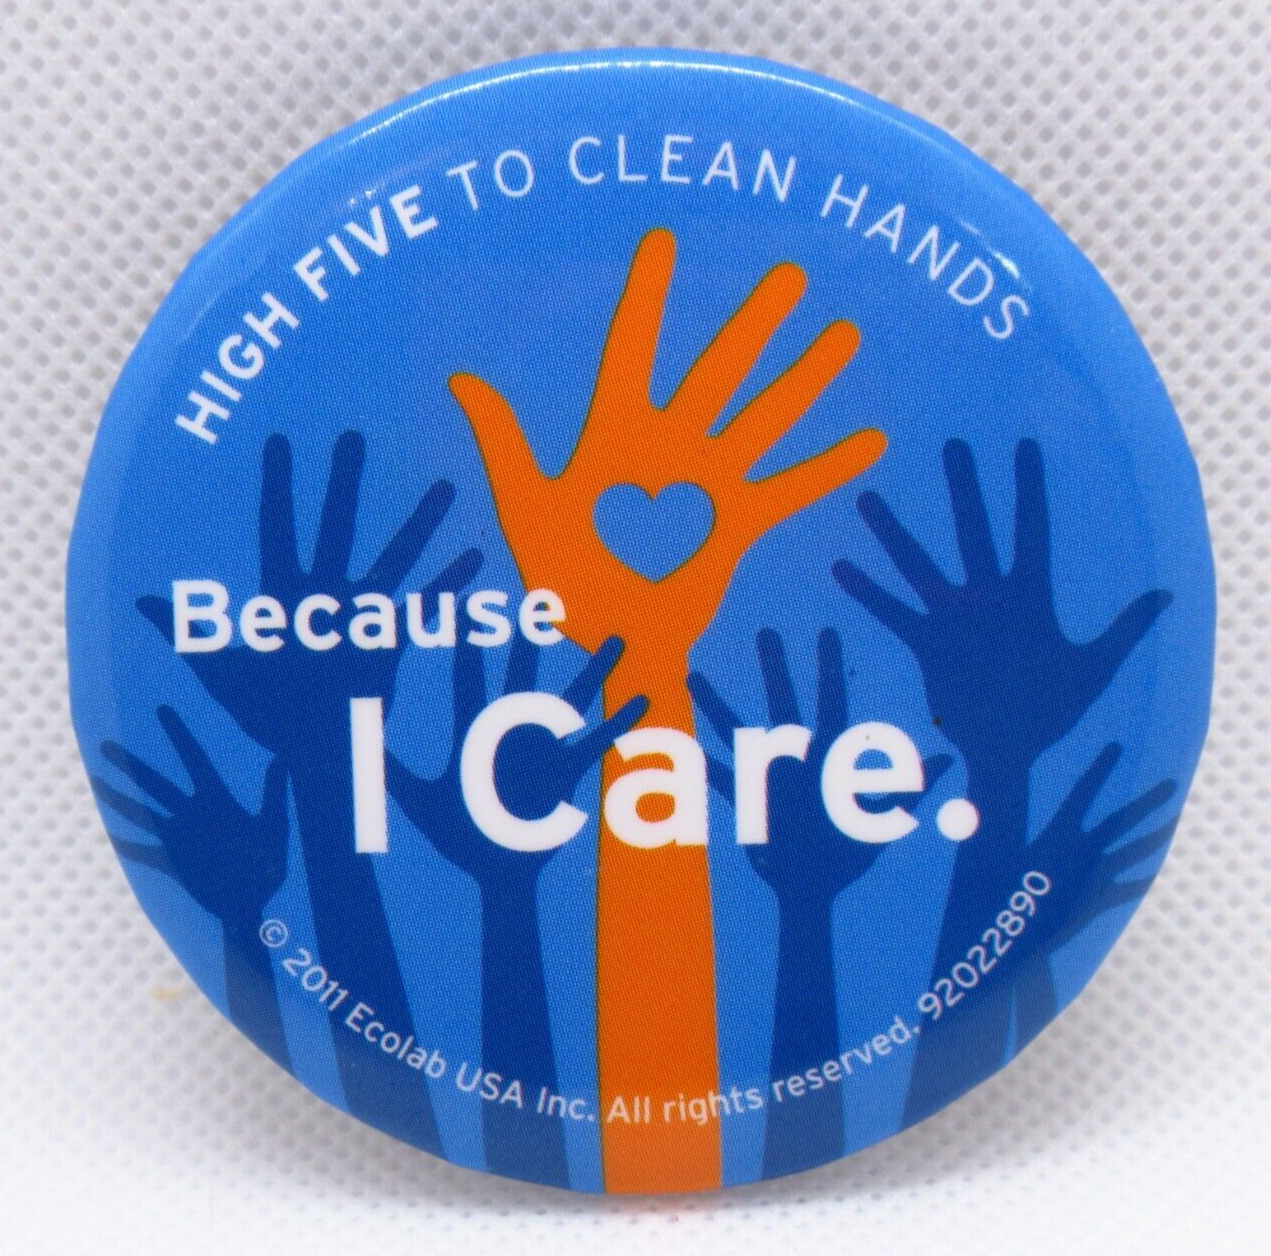 High Five To Clean Hands - Because I Care - Heart In Hand - Ecolab - Pinback